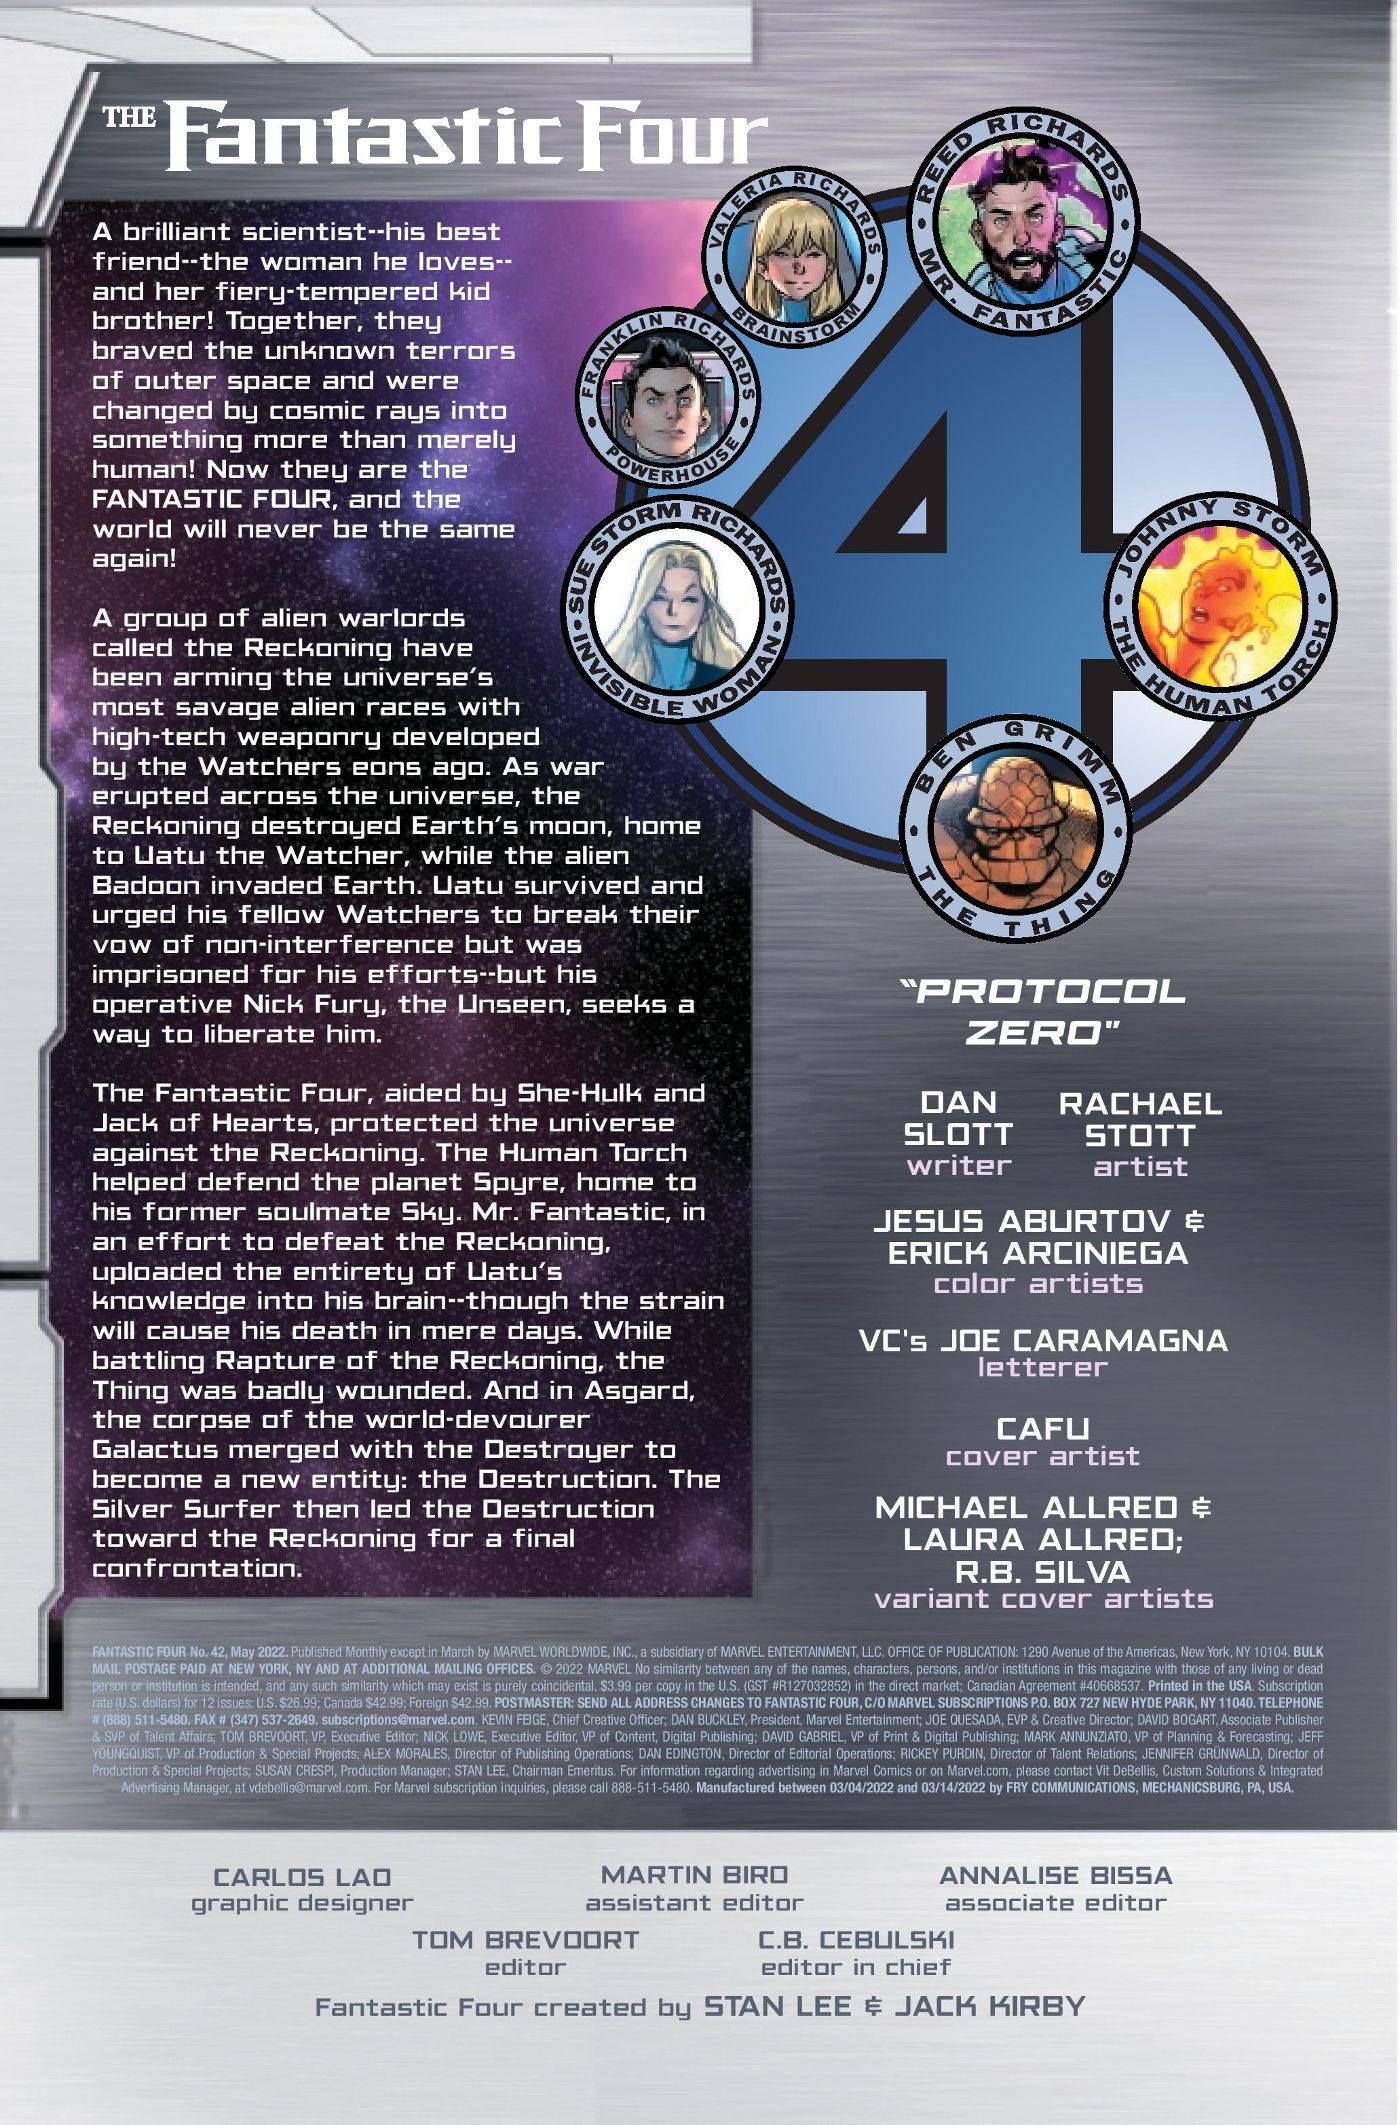 Fantastic Four 42 preview reed richards credits